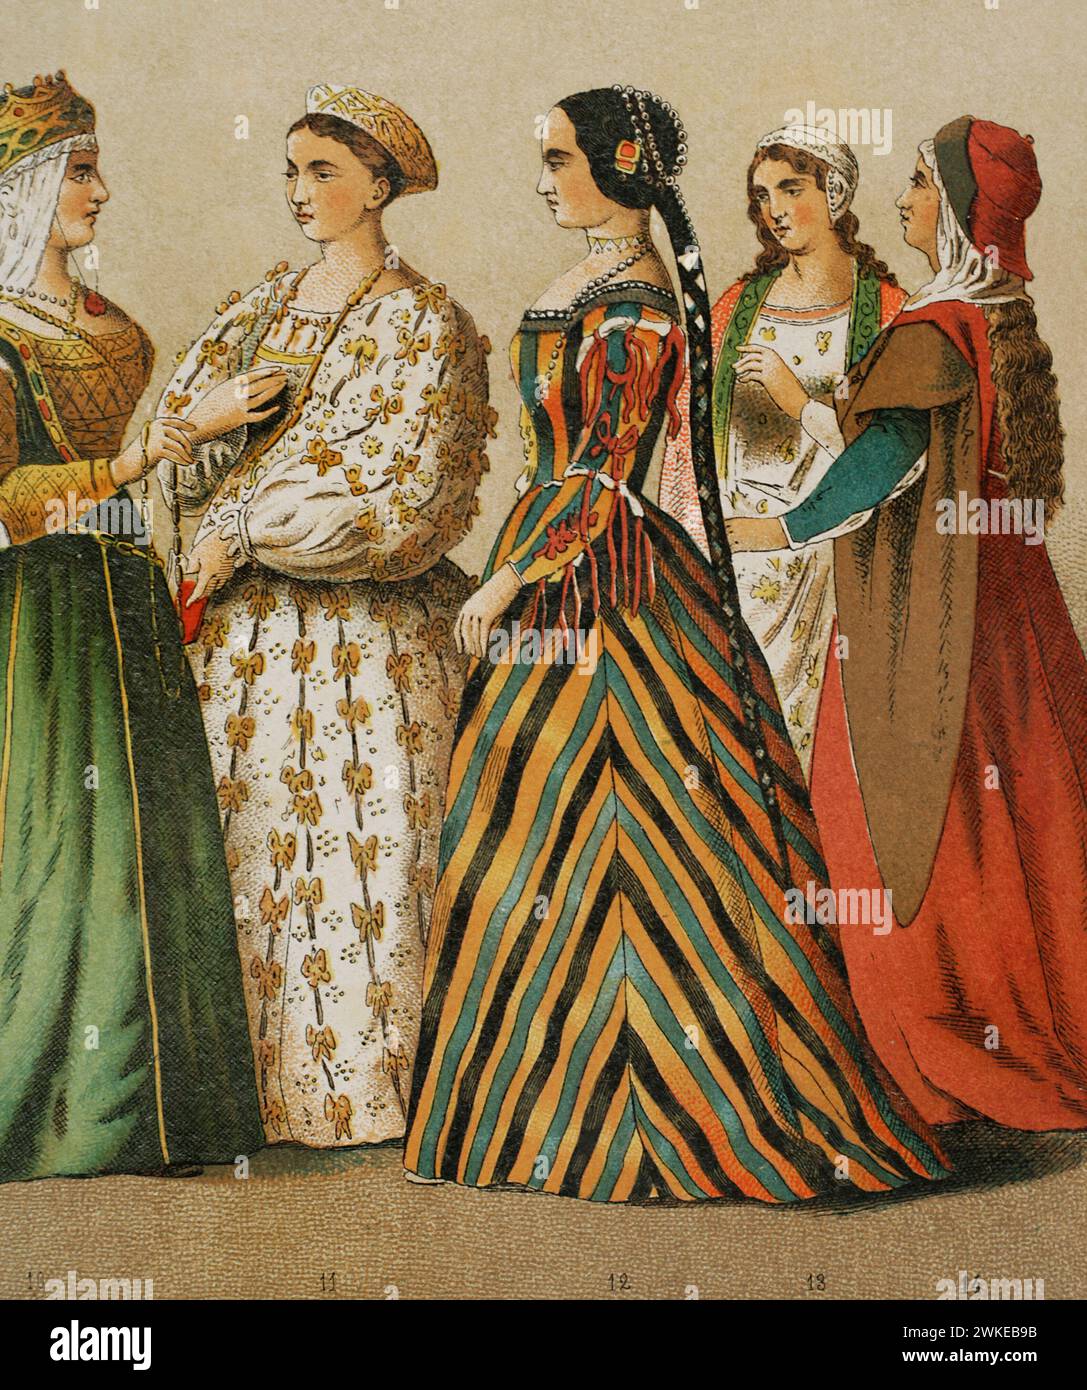 History of Italy. 1400. Queen of Cyprus and ladies of the nobility. Chromolithography. 'Historia Universal', by César Cantú. Volume VI, 1885. Stock Photo